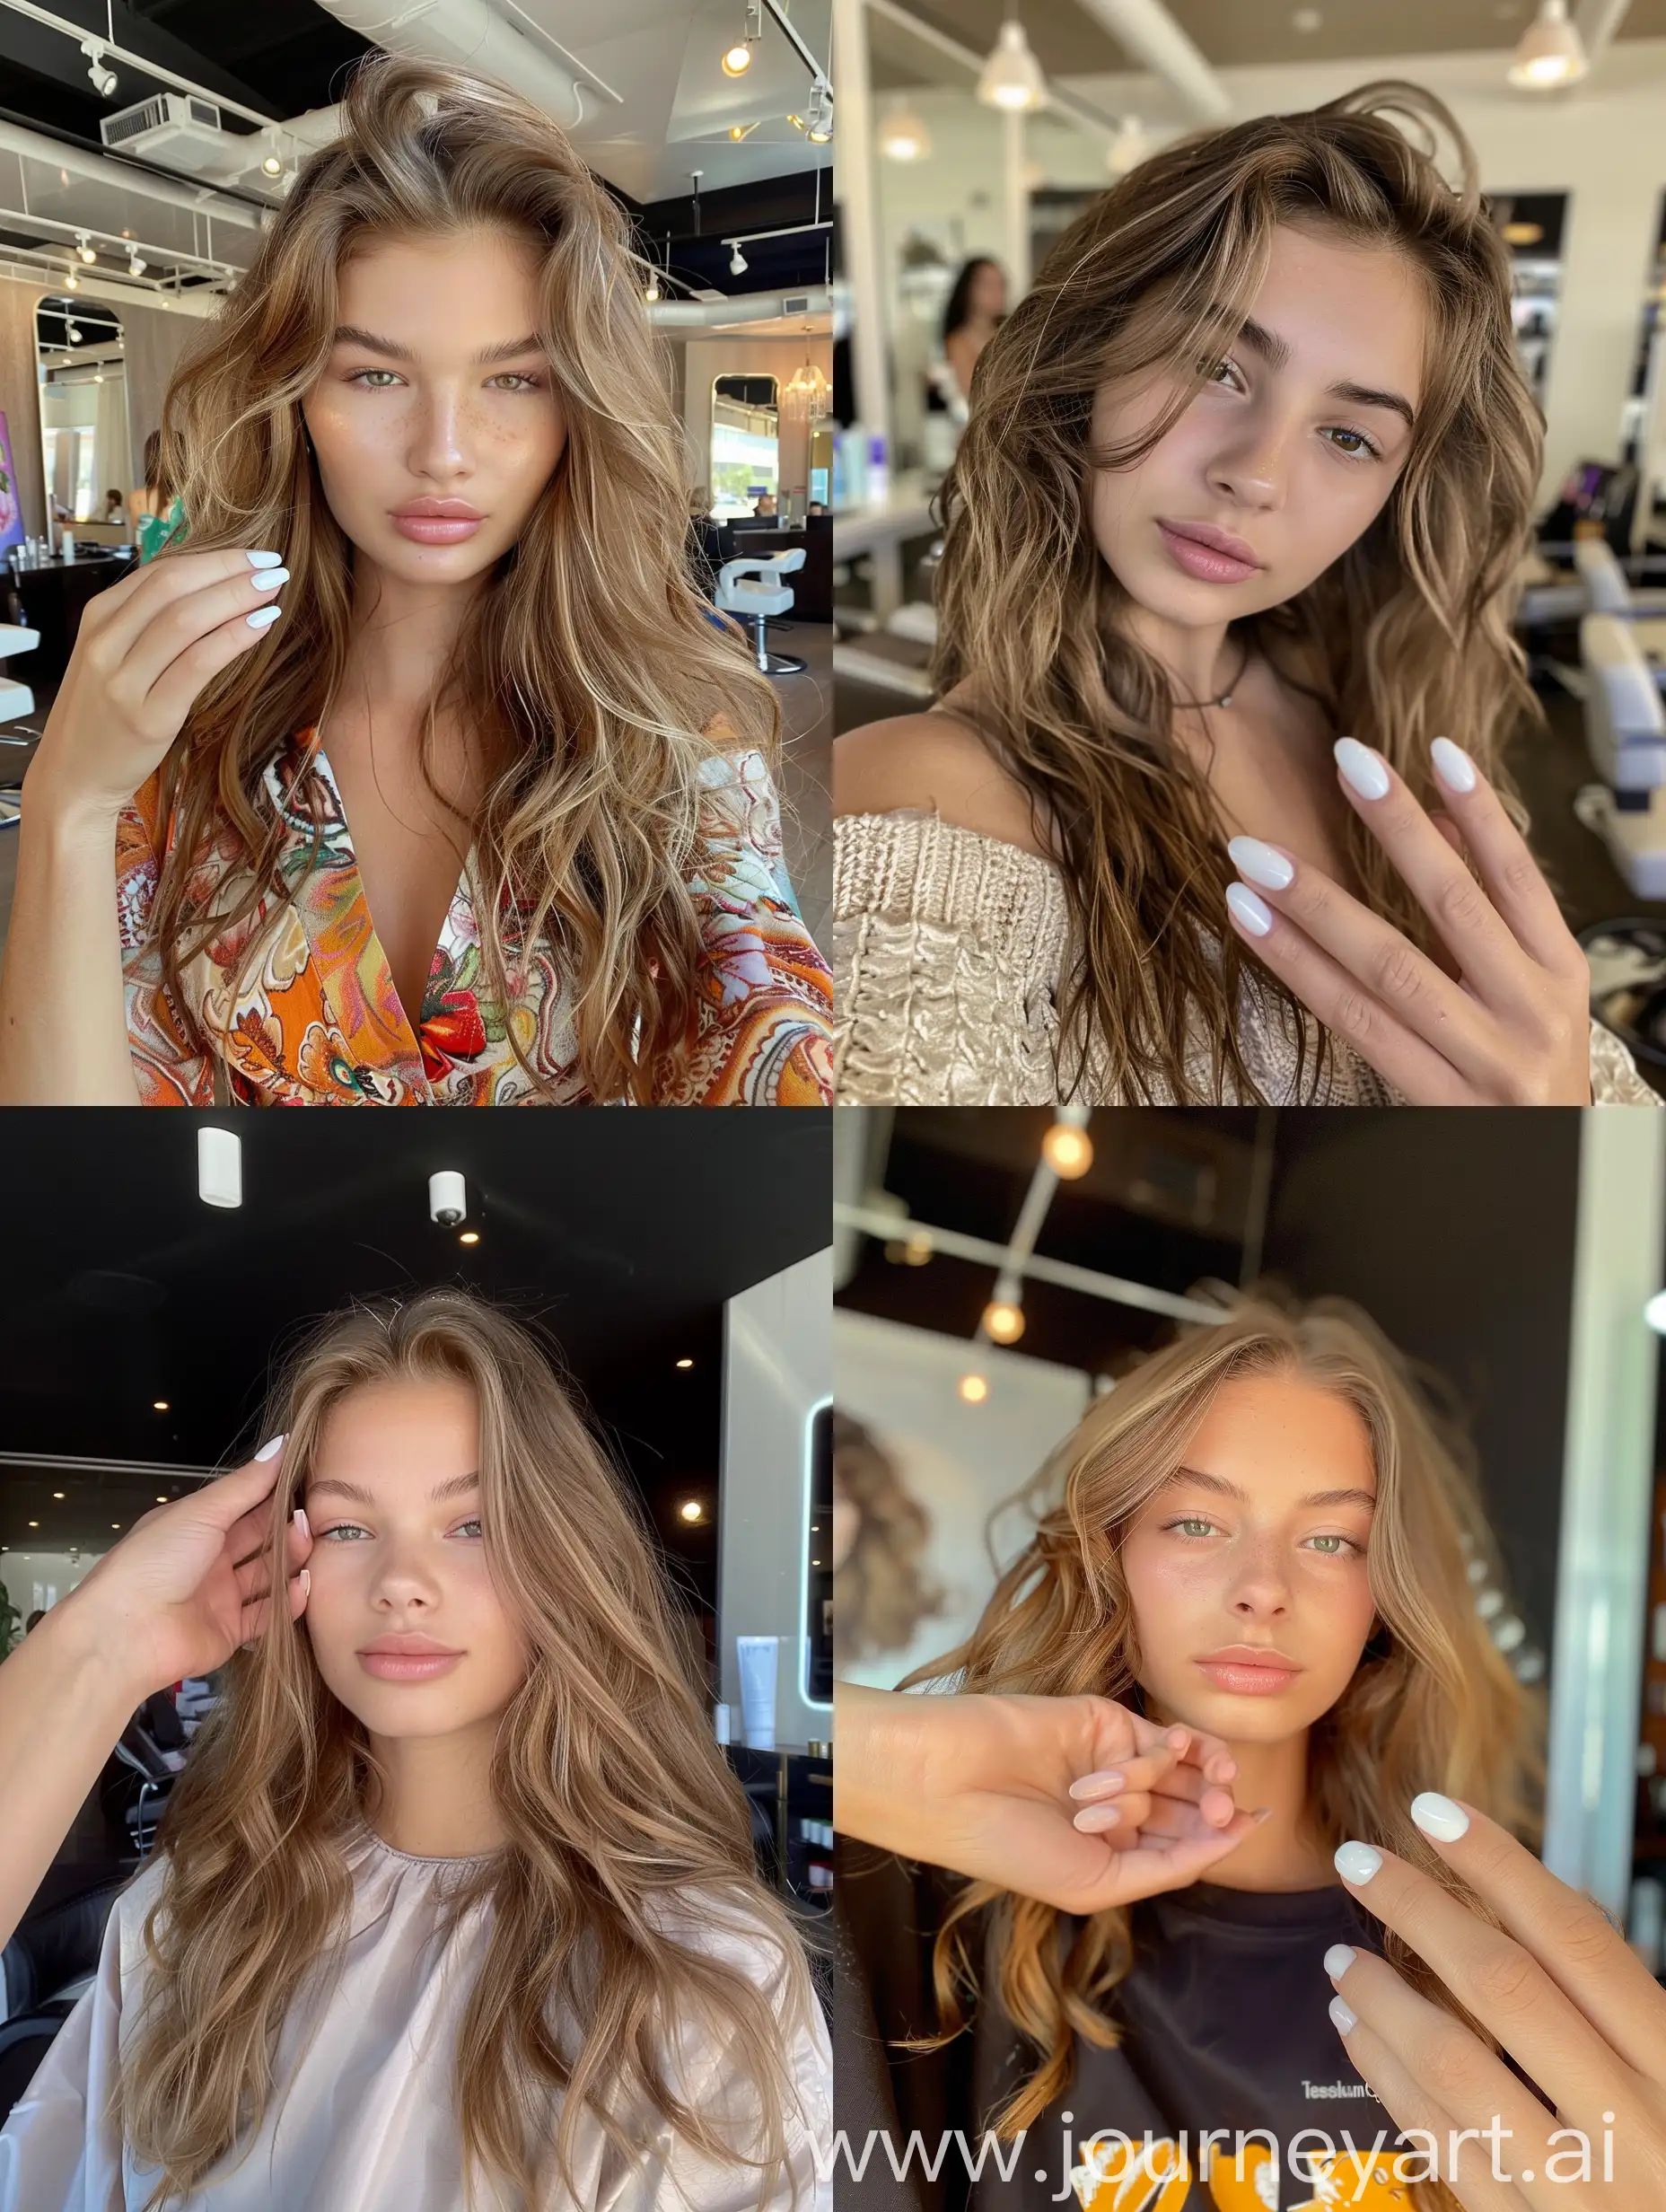 Stylish-Teen-Model-Poses-for-Salon-Selfie-with-Manicured-Hand